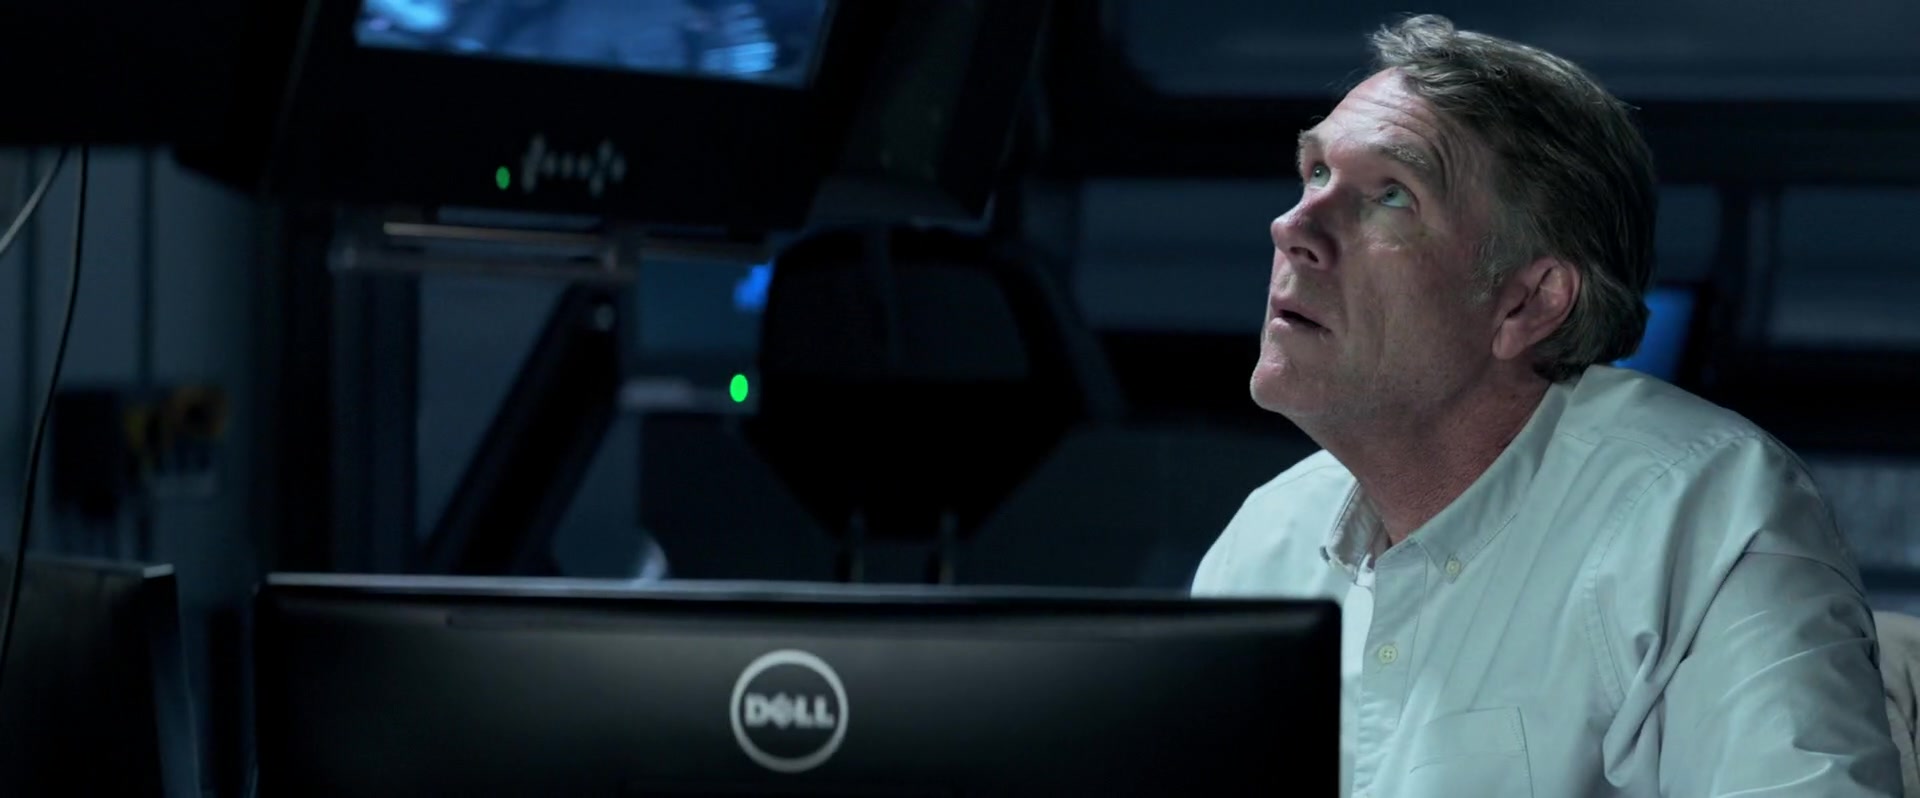 Dell Computer Used by Robert Taylor in The Meg (2018) Movie1920 x 798